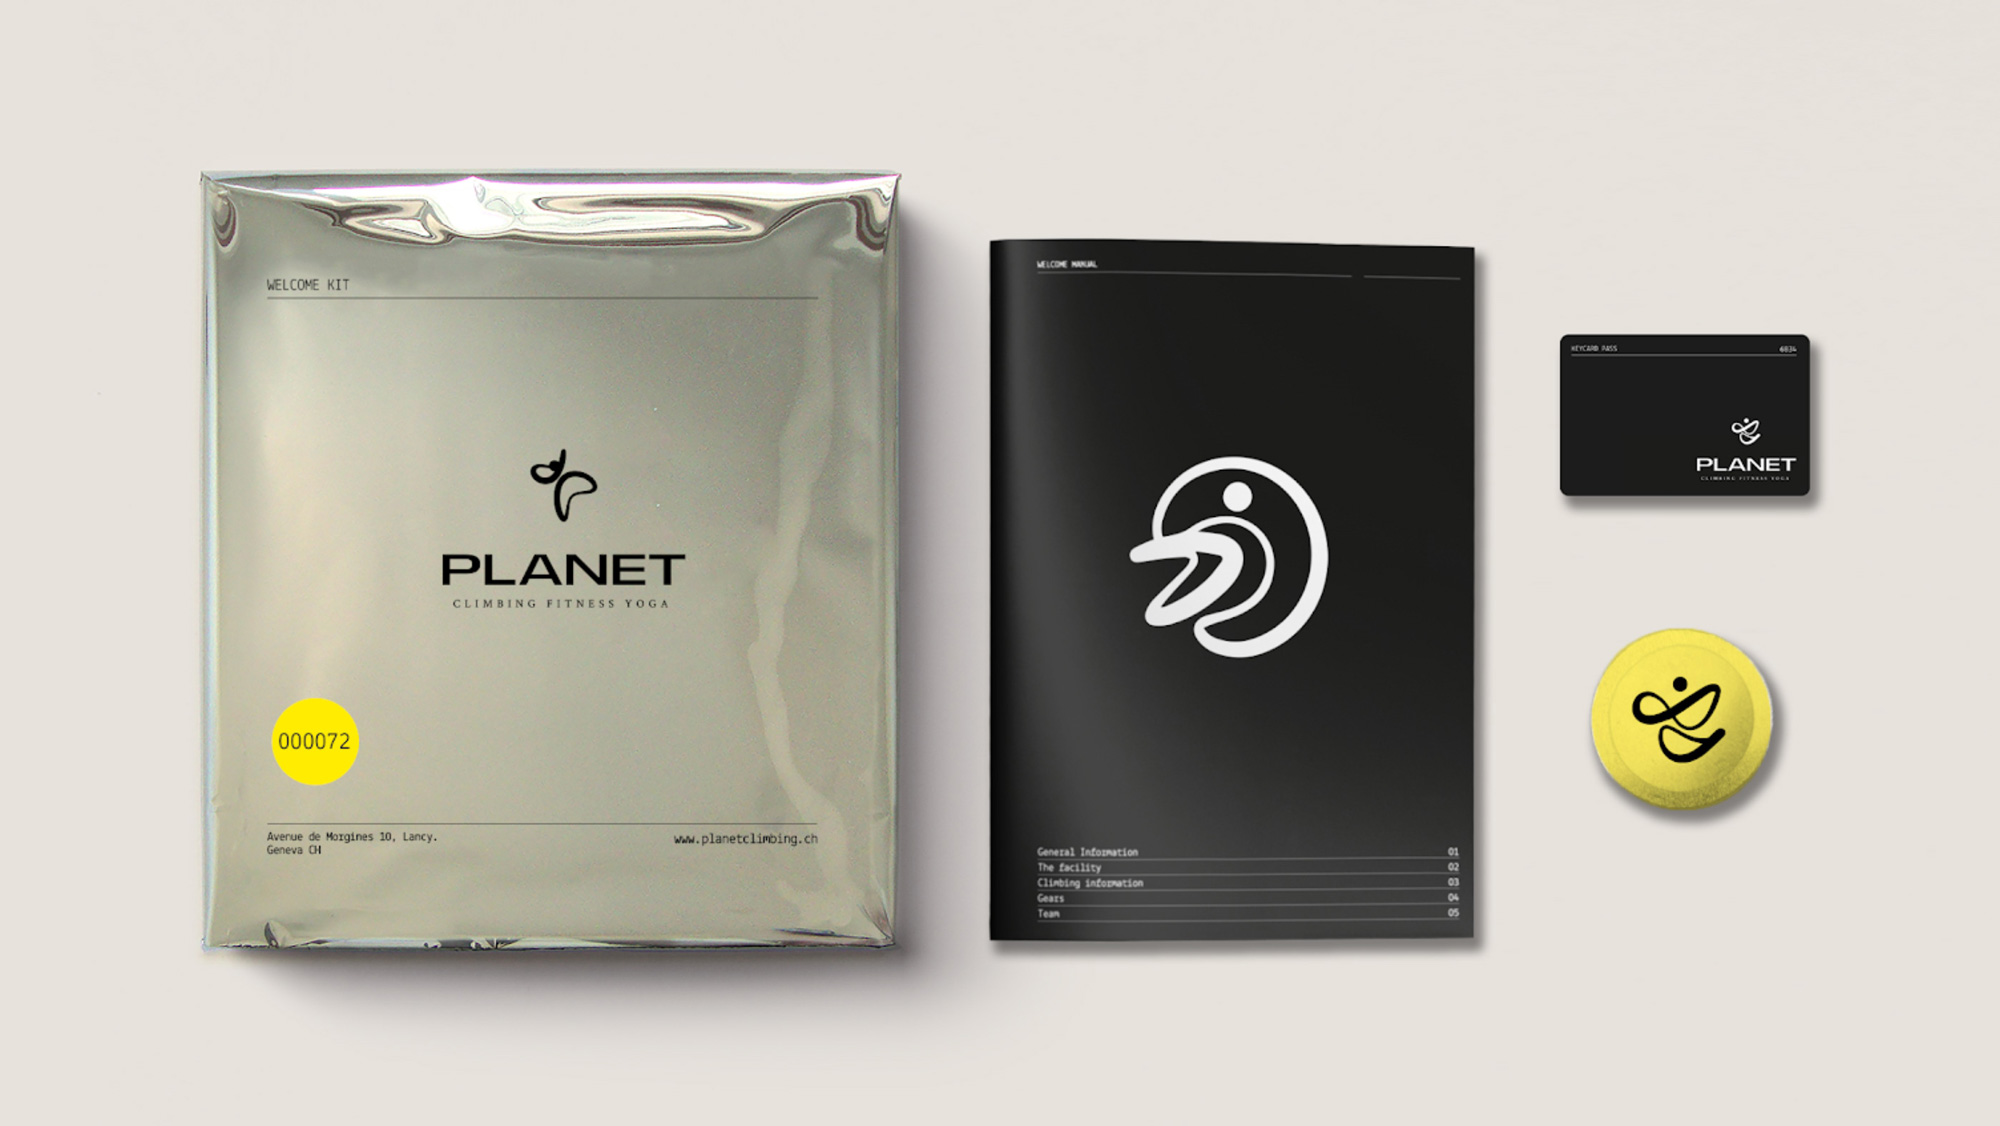 New Logo and Identity for Planet by Tundra